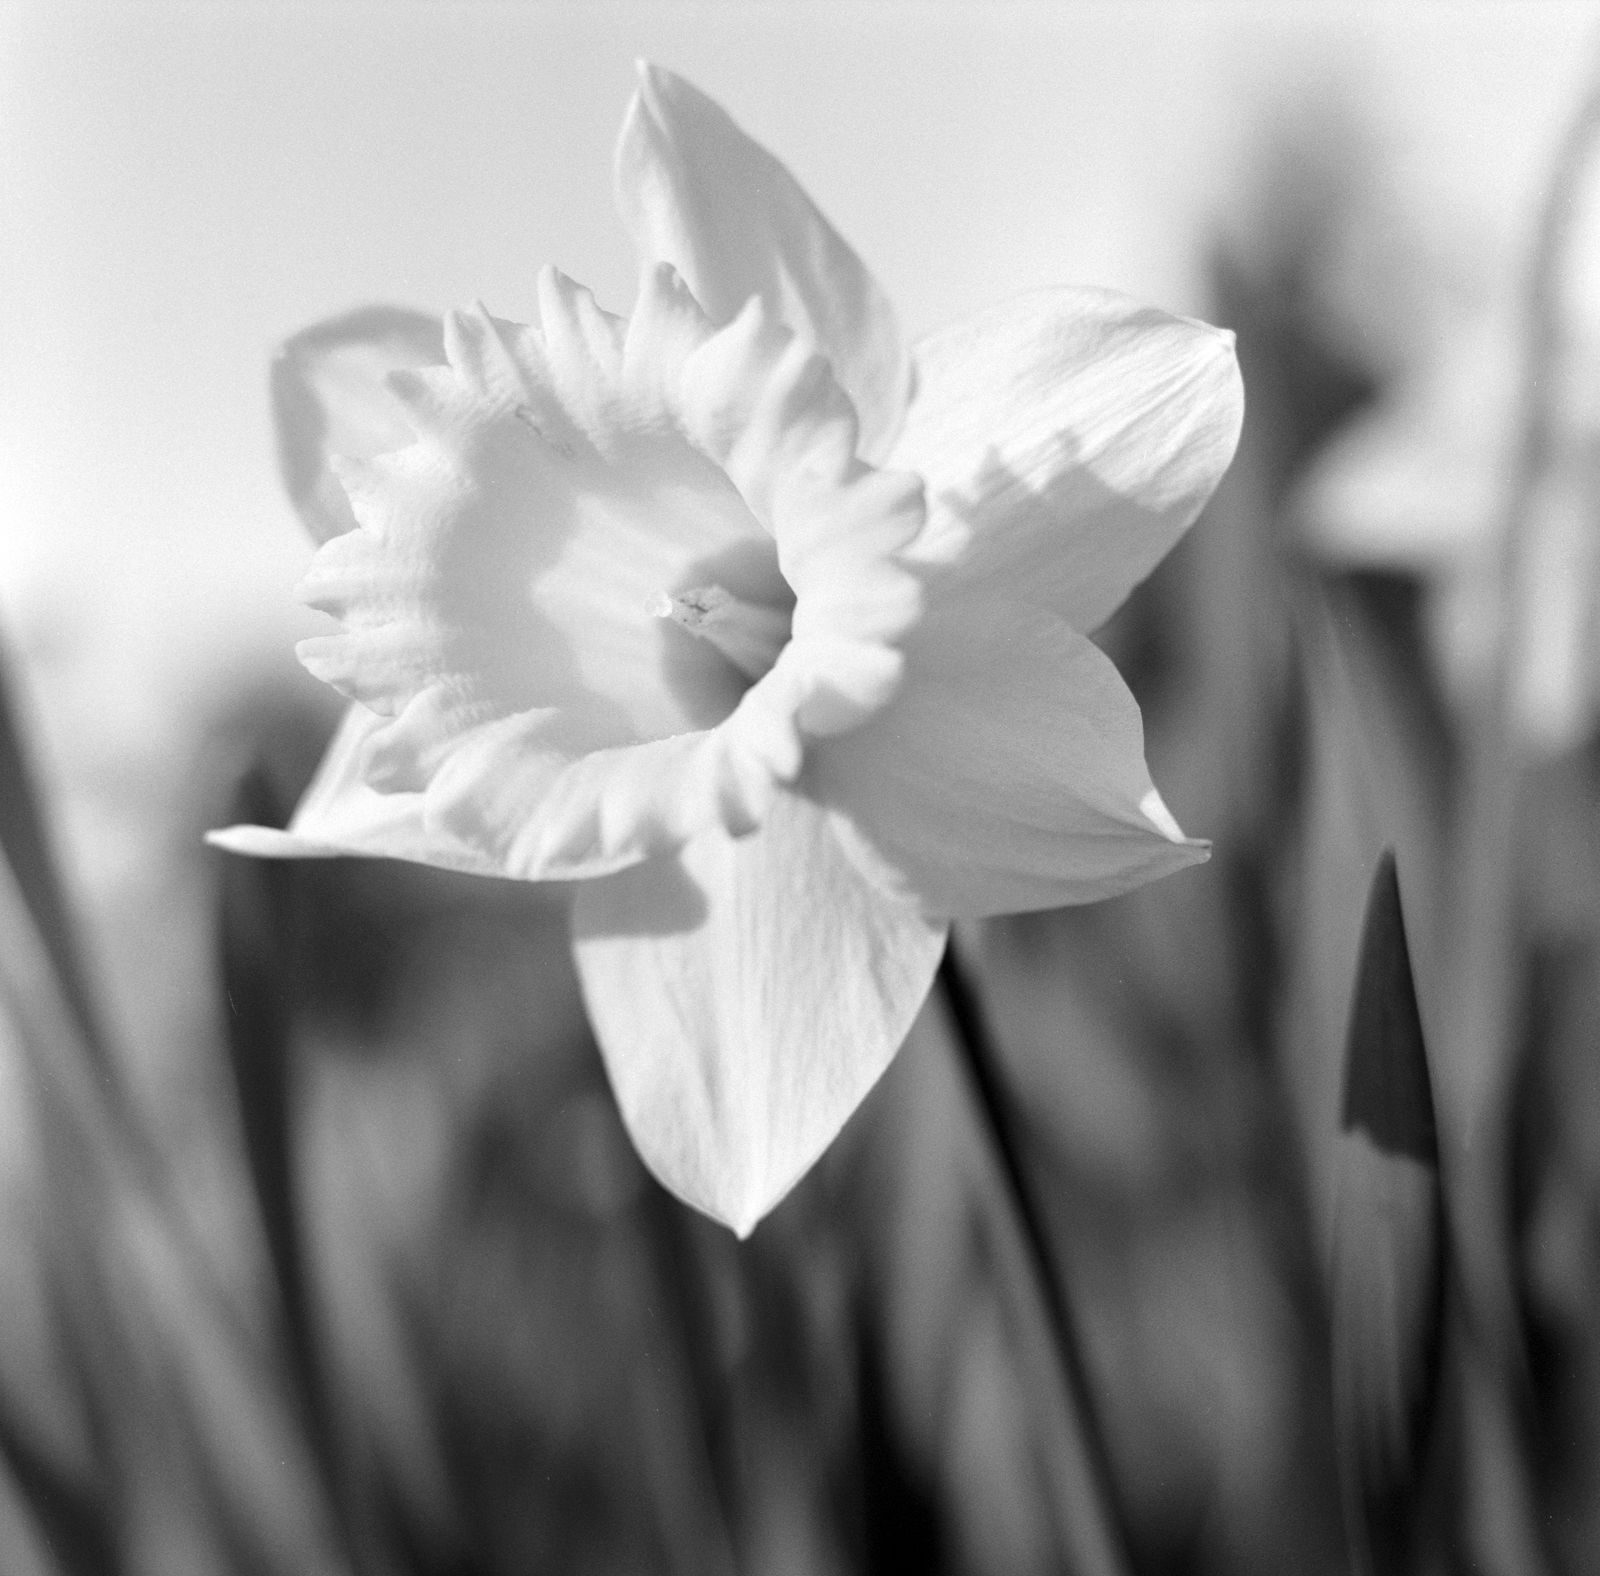 @PhlStrchn Some of my favourite photographs taken on Ilford HP5+ film over the past couple of months. Ilford HP5+ (120) at ISO400 (I used a yellow filter when taking the shots of the daffodils.) Mamiya C220 #ilfordphoto #fridayfavourites #madewithHP5